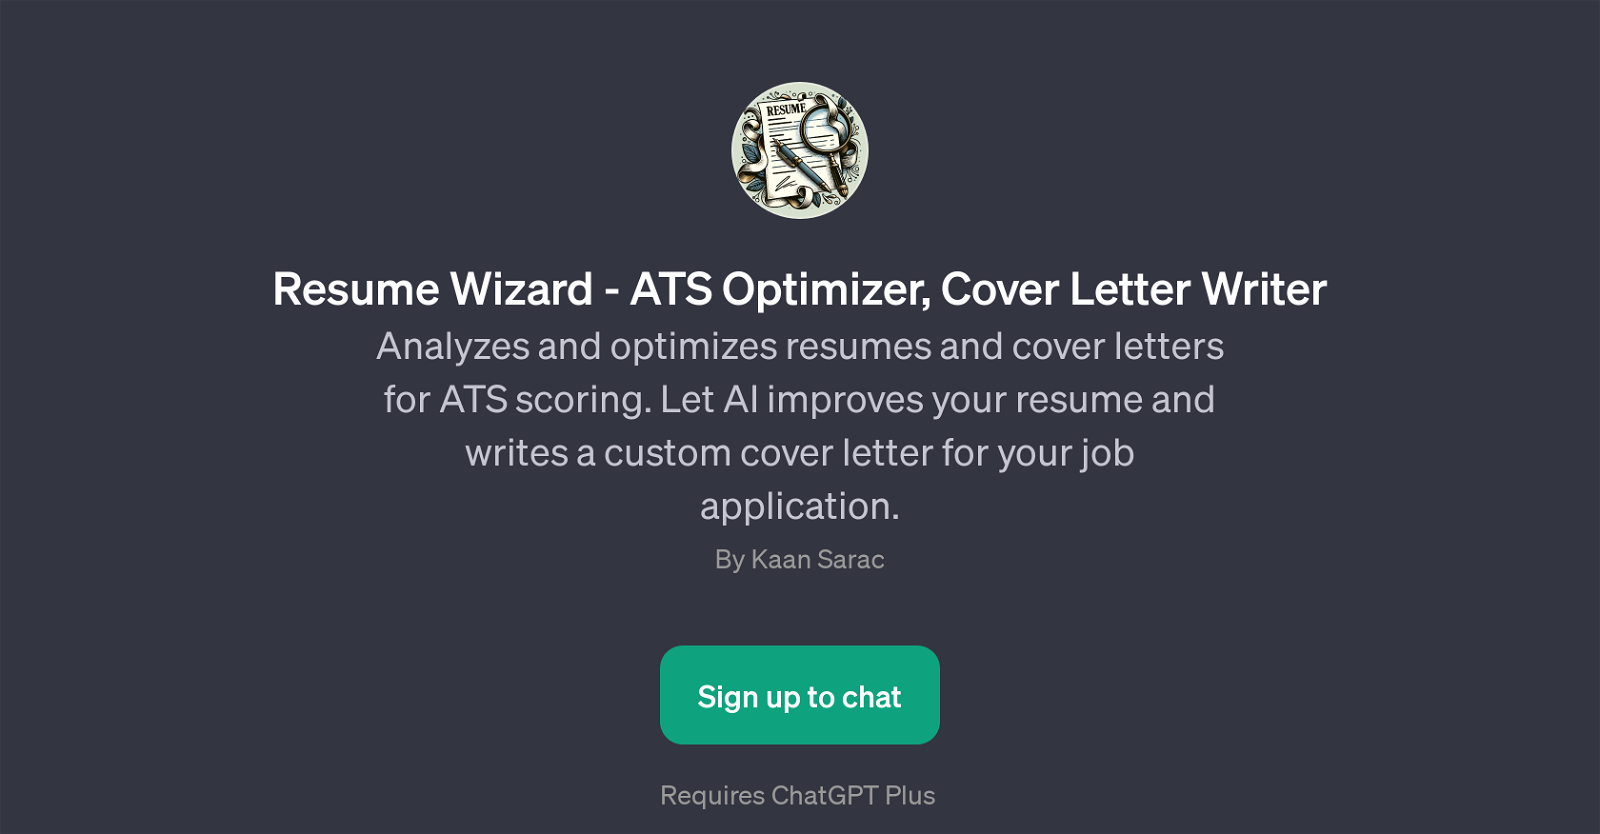 Resume Wizard - ATS Optimizer, Cover Letter Writer website